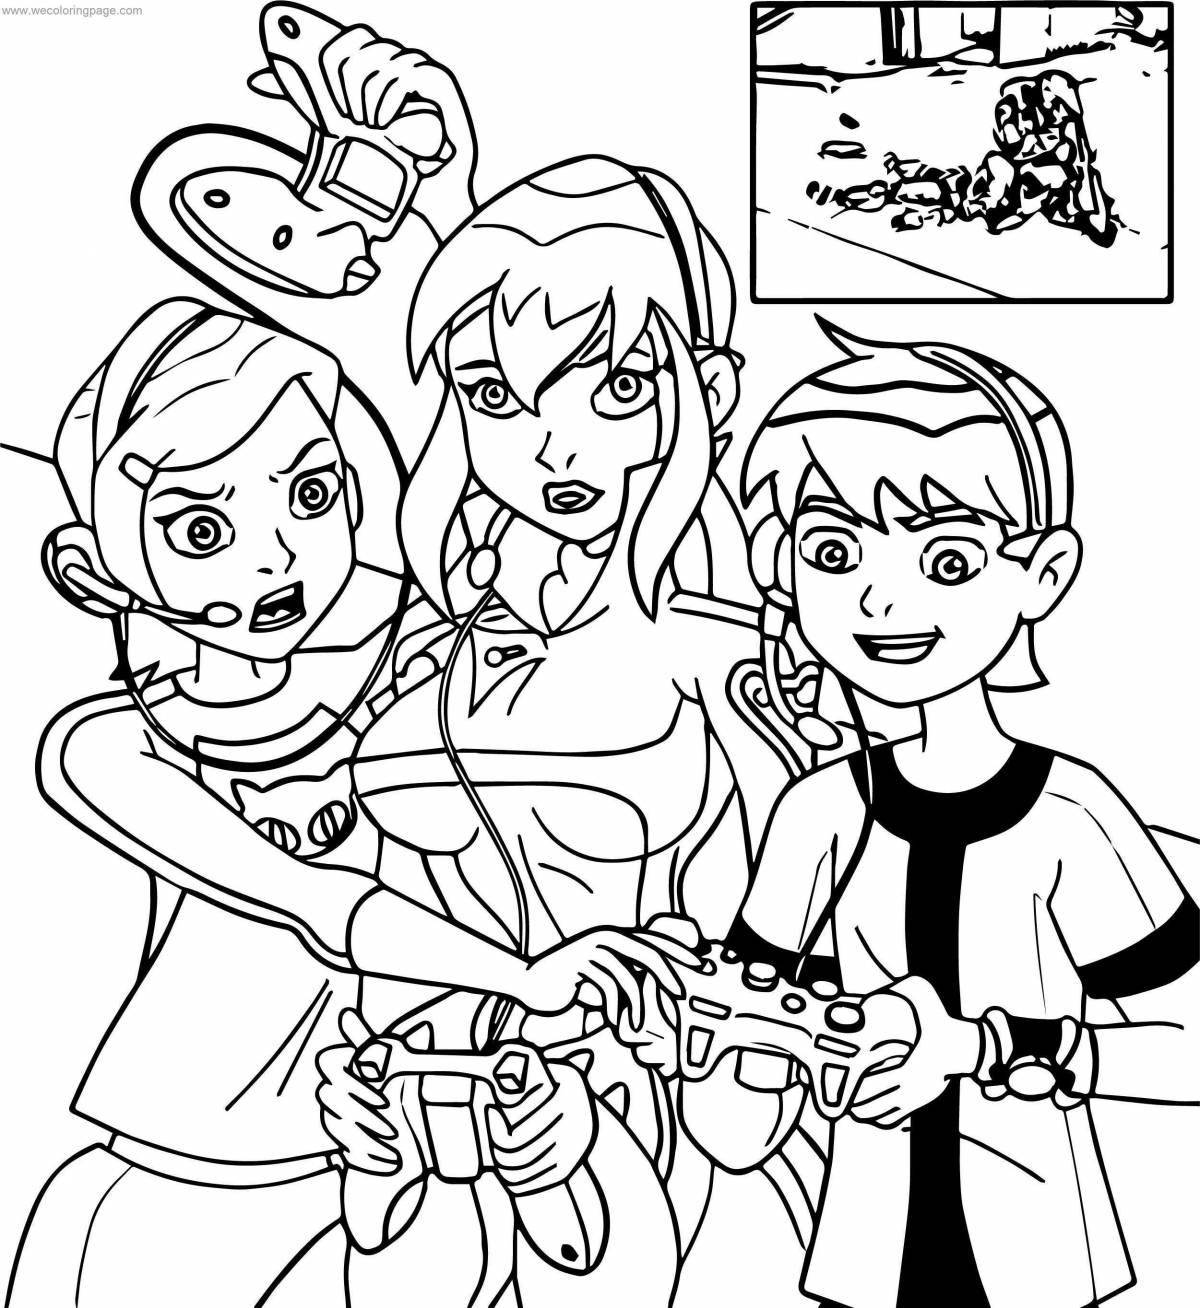 Glittering Gwen coloring book